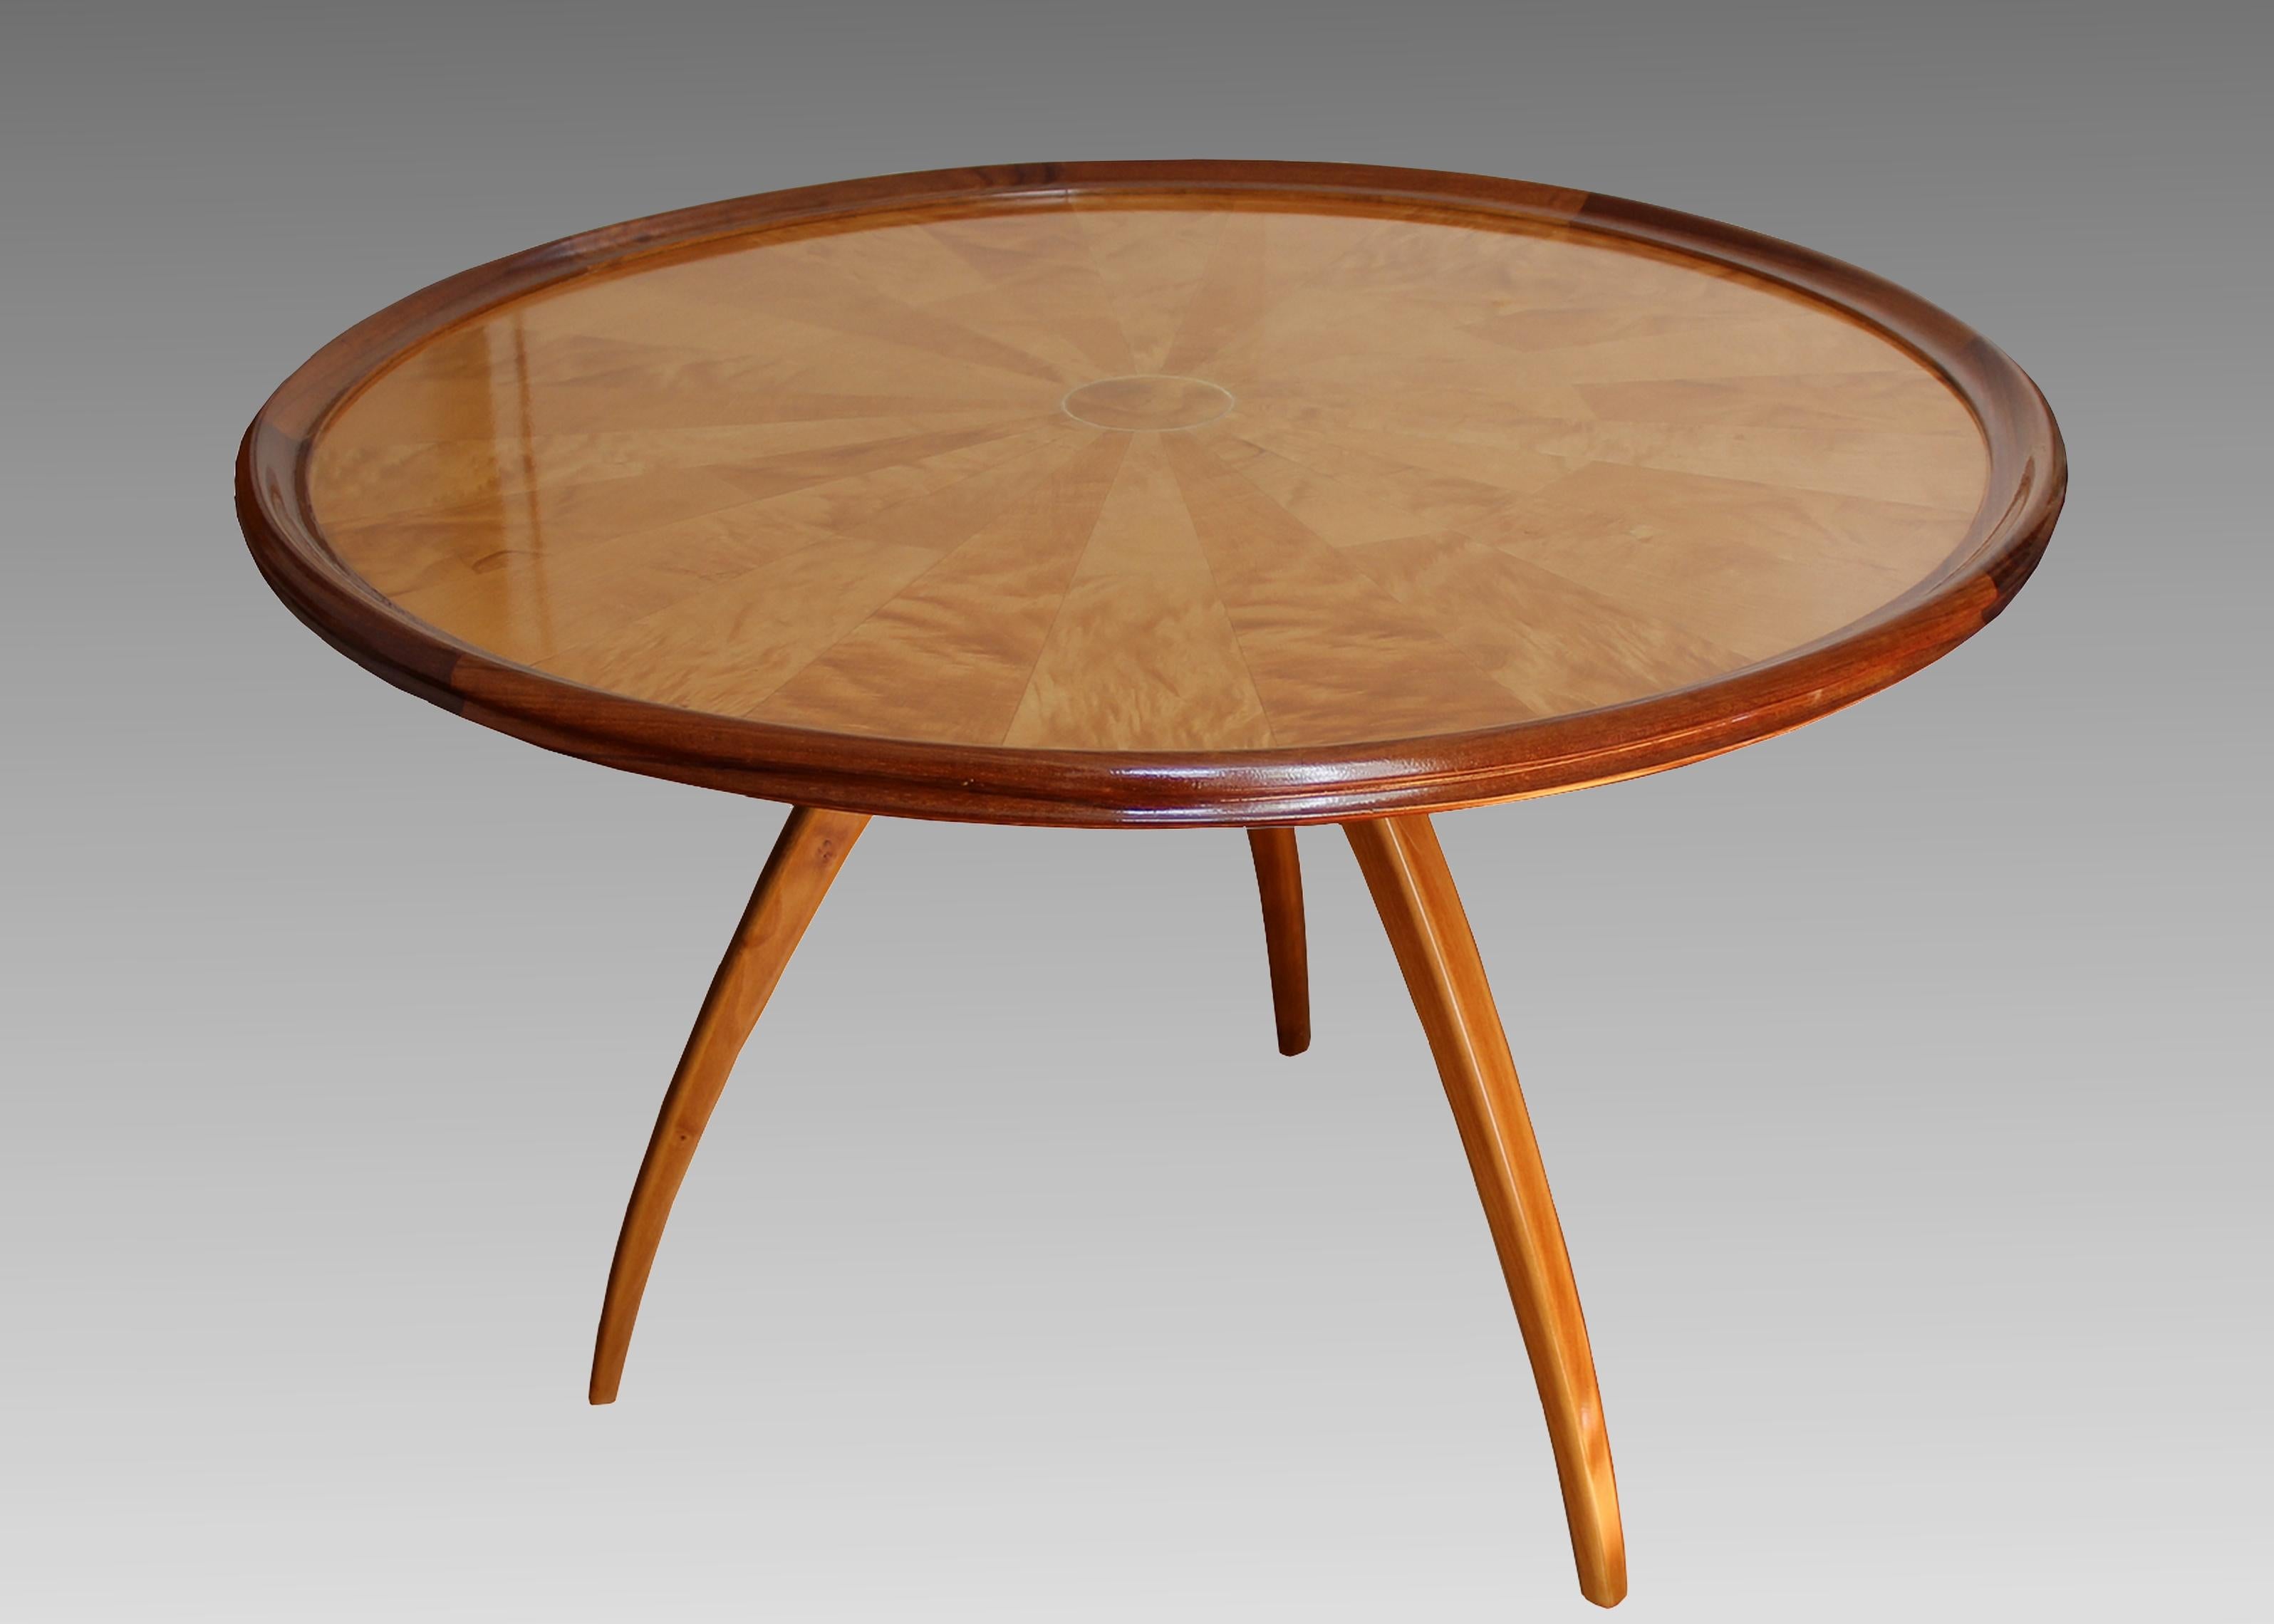 French Art Deco Pedestal Table in Sycamore and Blond Mahogany, France, circa 1950 For Sale